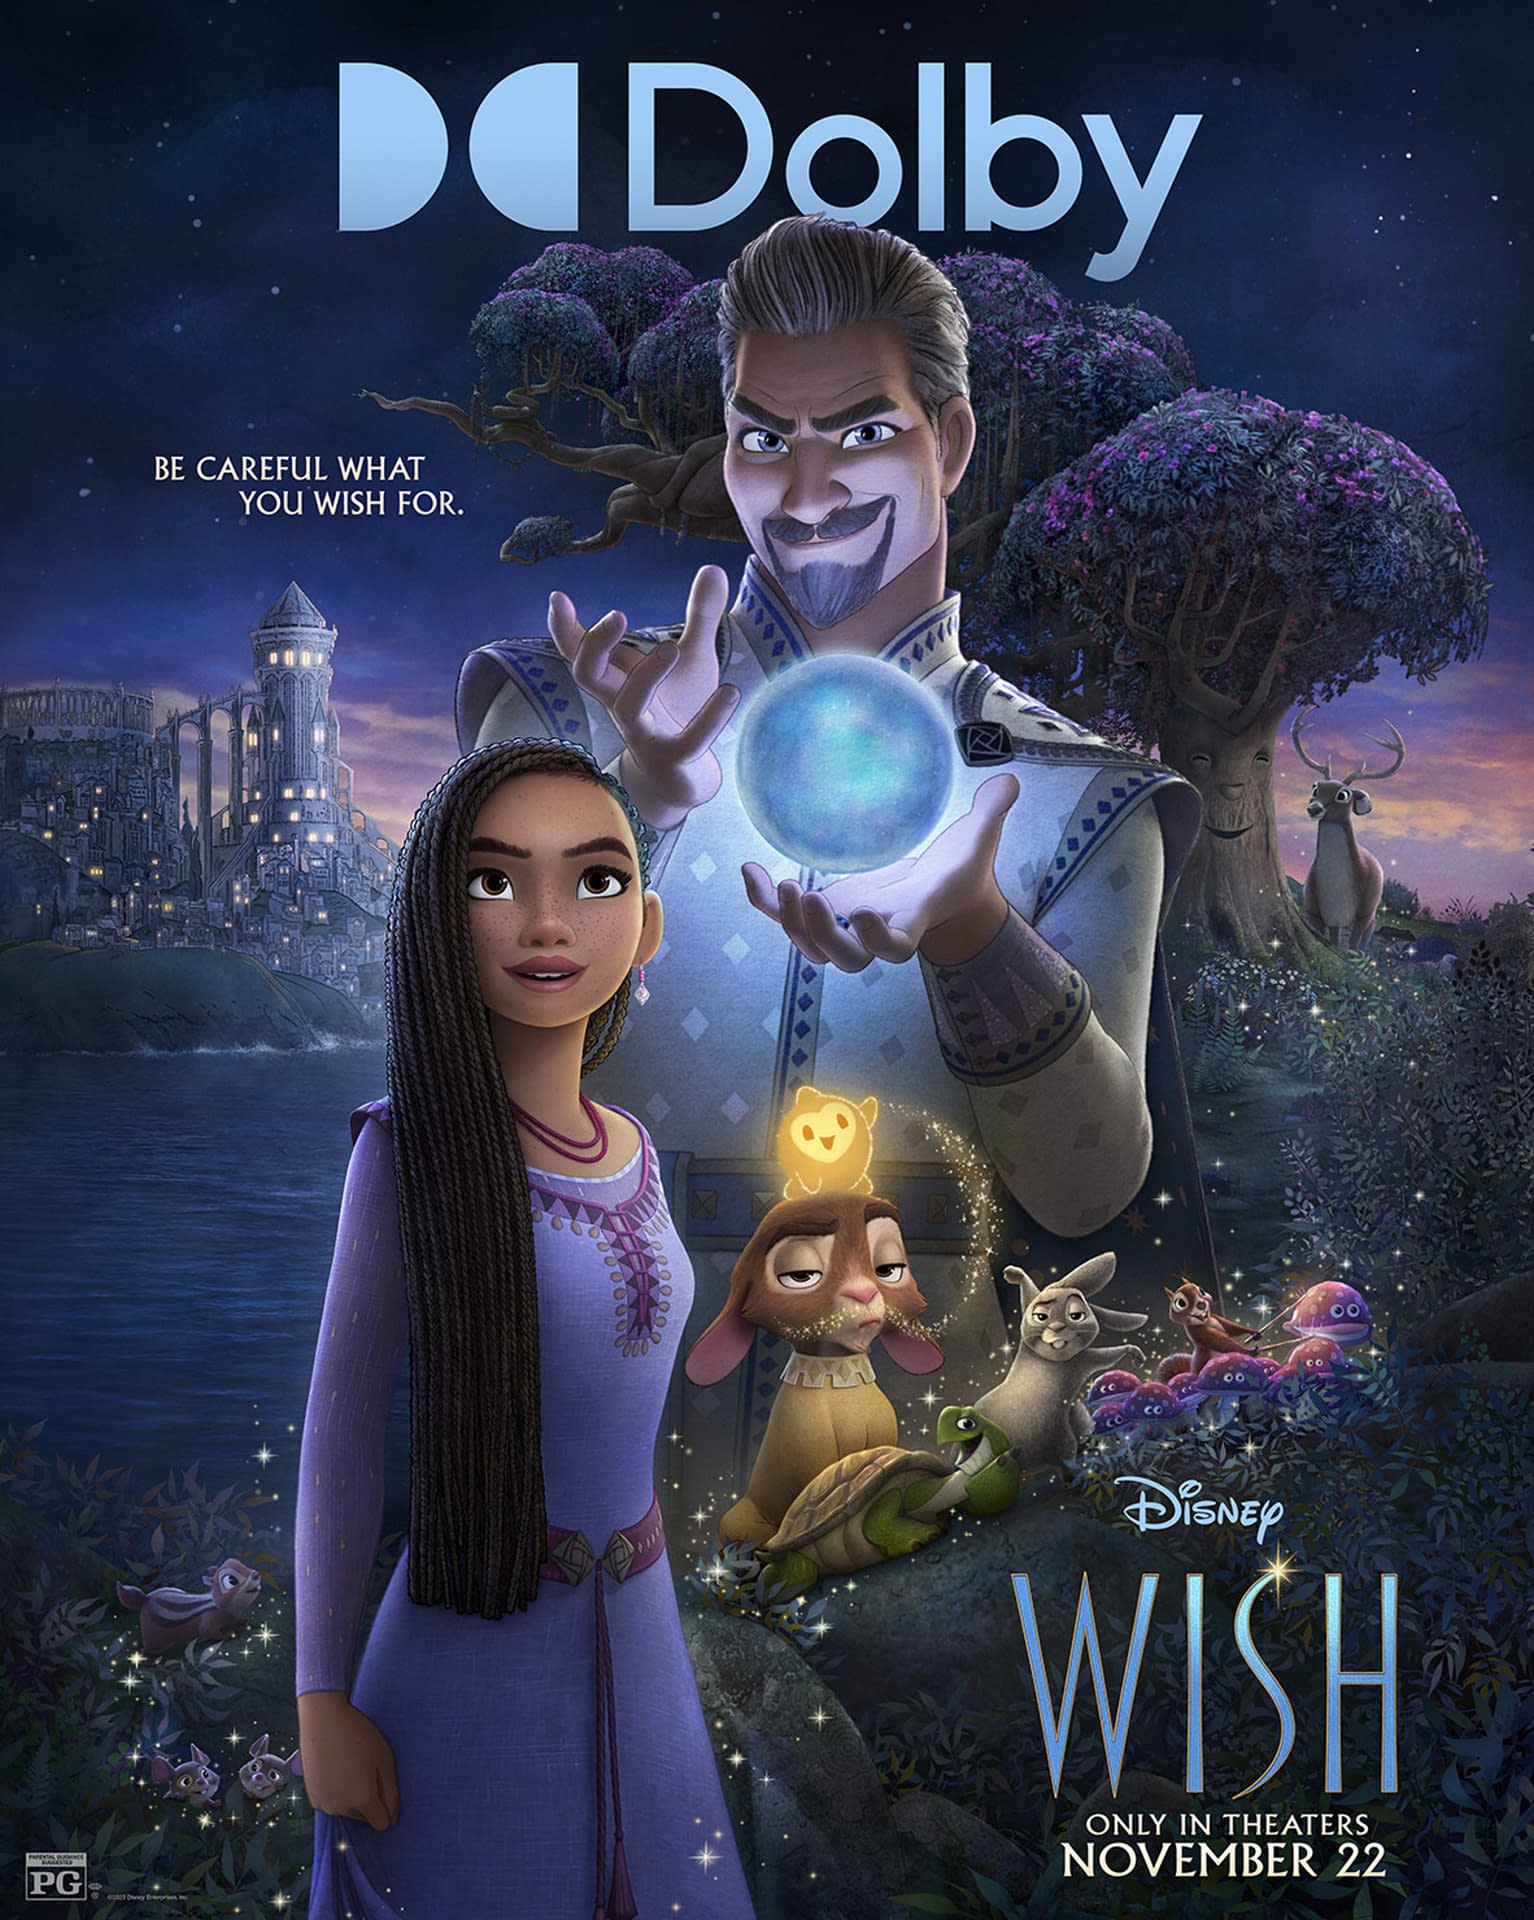 Wish Tickets On Sale, Posters, Clip, And BehindTheScenes Featurette